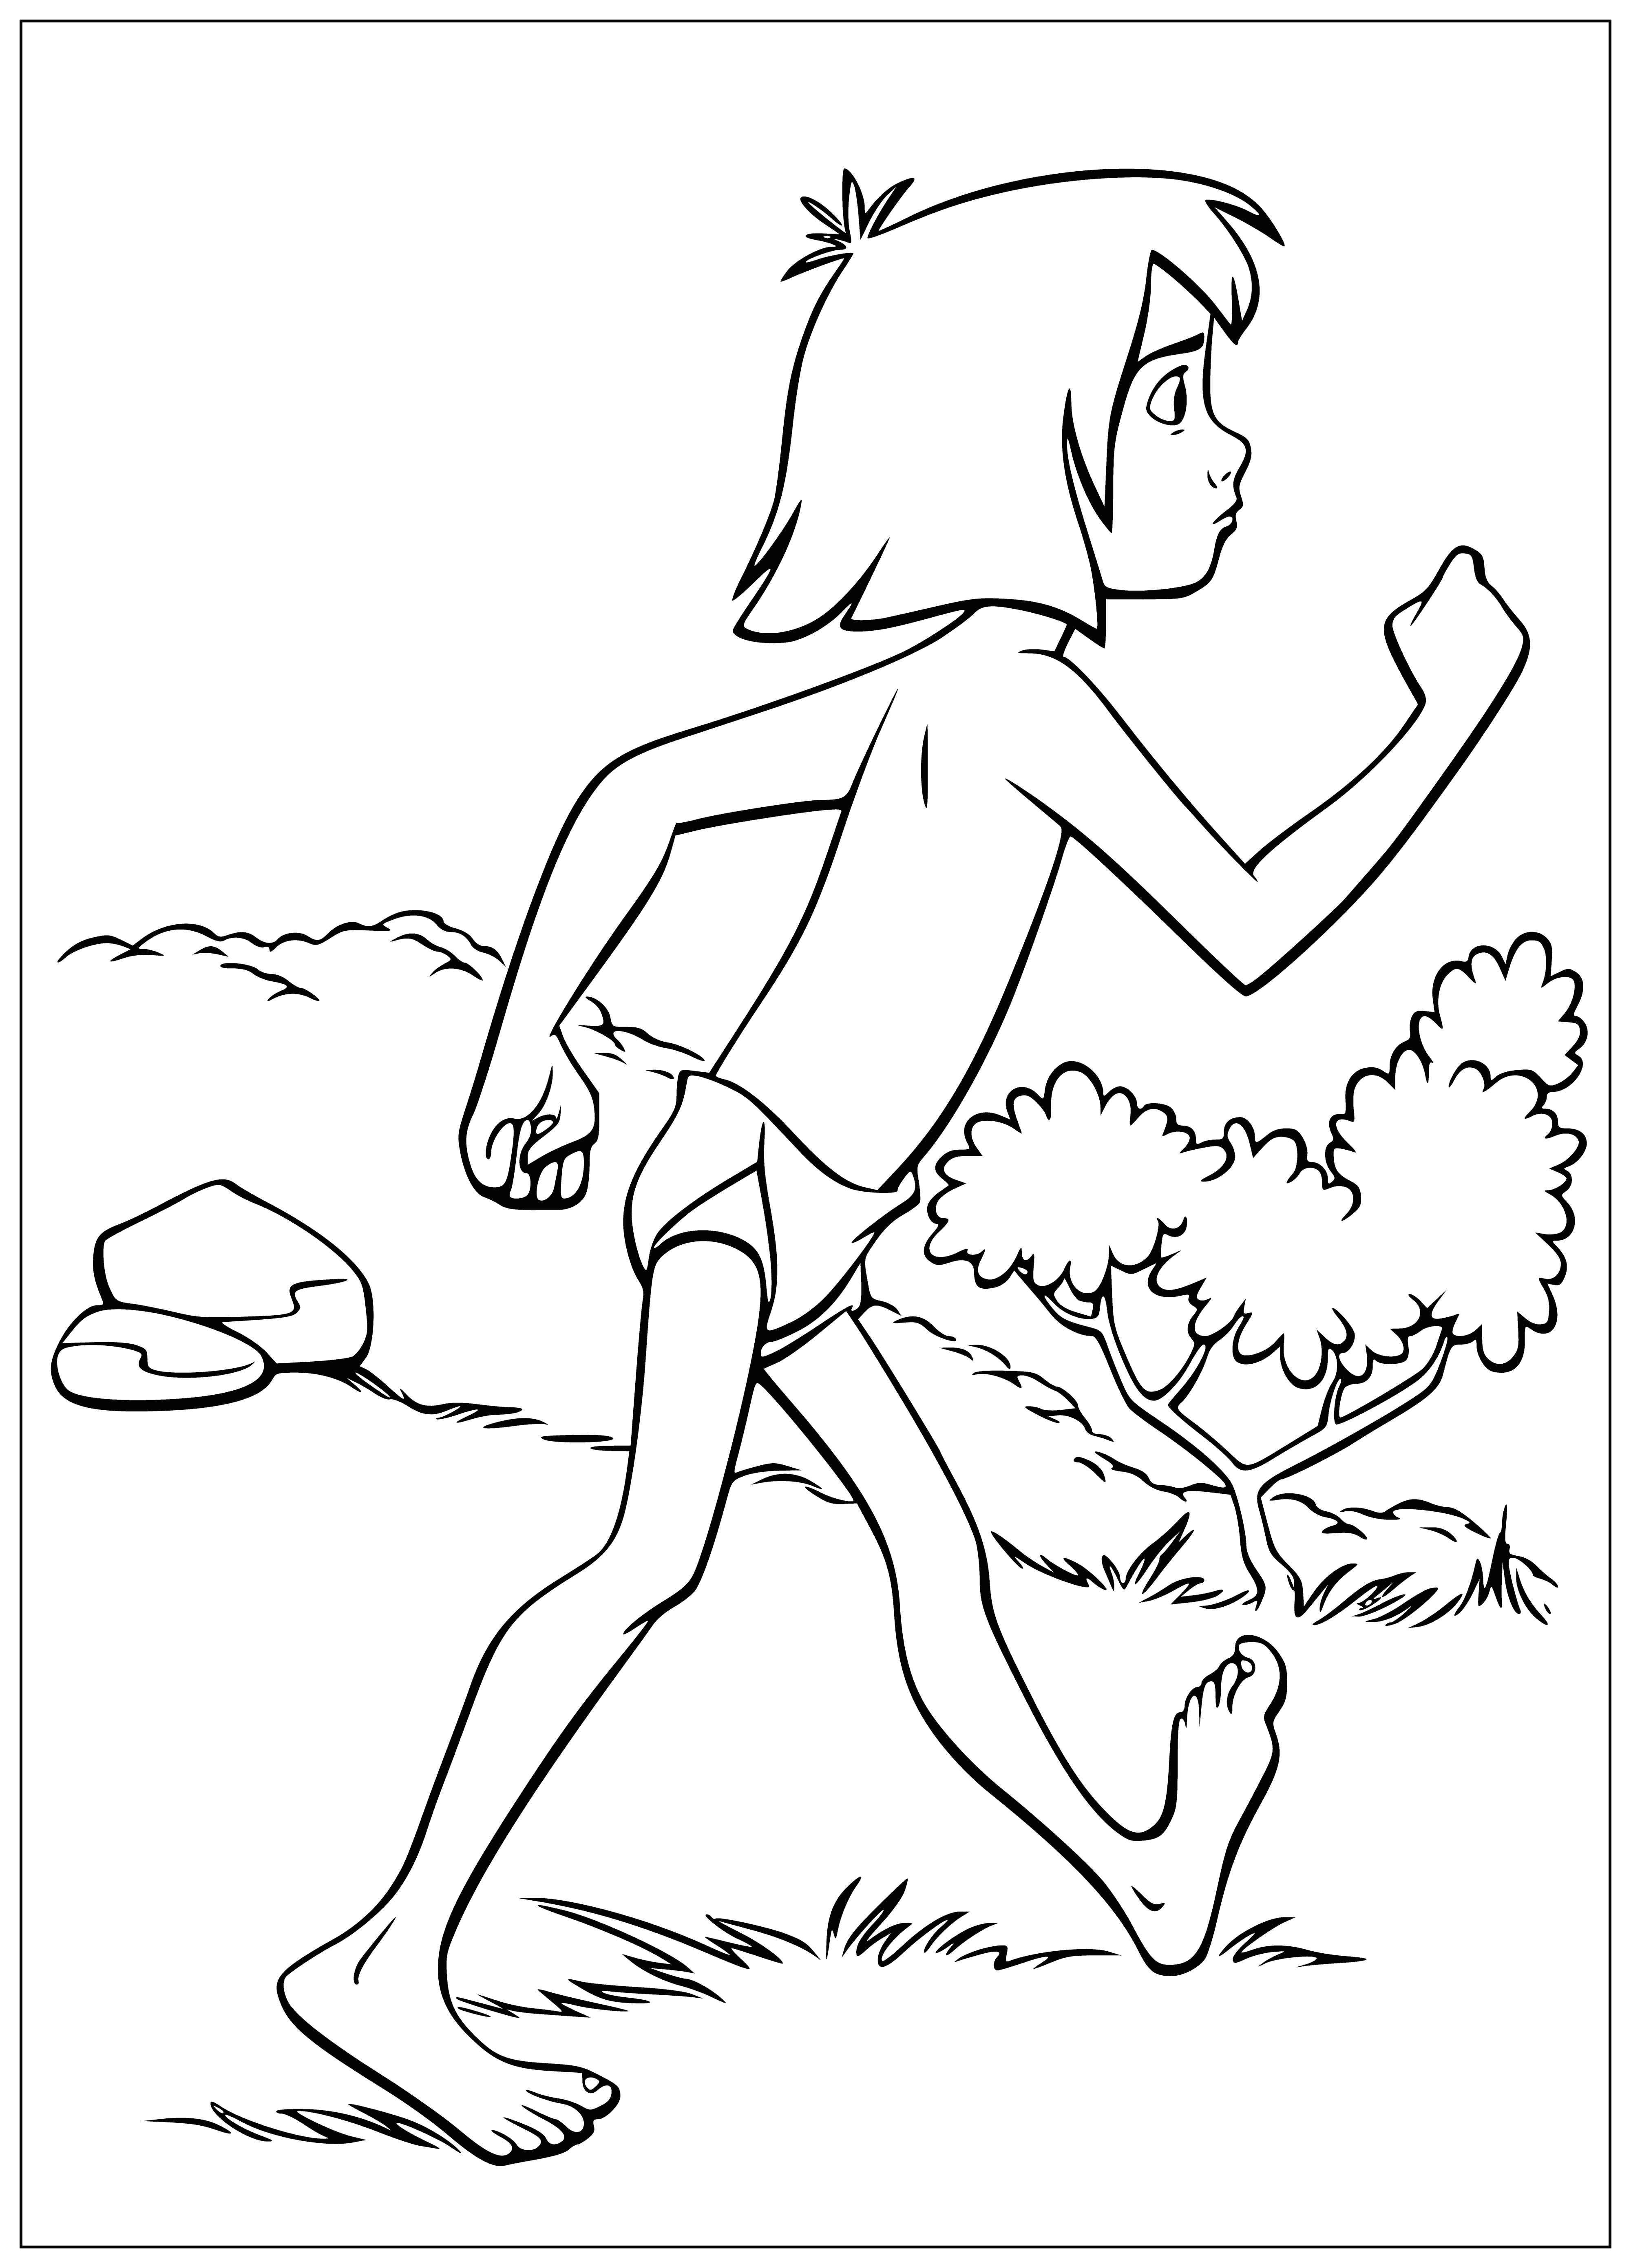 coloring page: Mowgli, a young boy with light skin, is happily surrounded by a tiger, snake & elephant in the jungle. He has a knife and wears a loincloth.